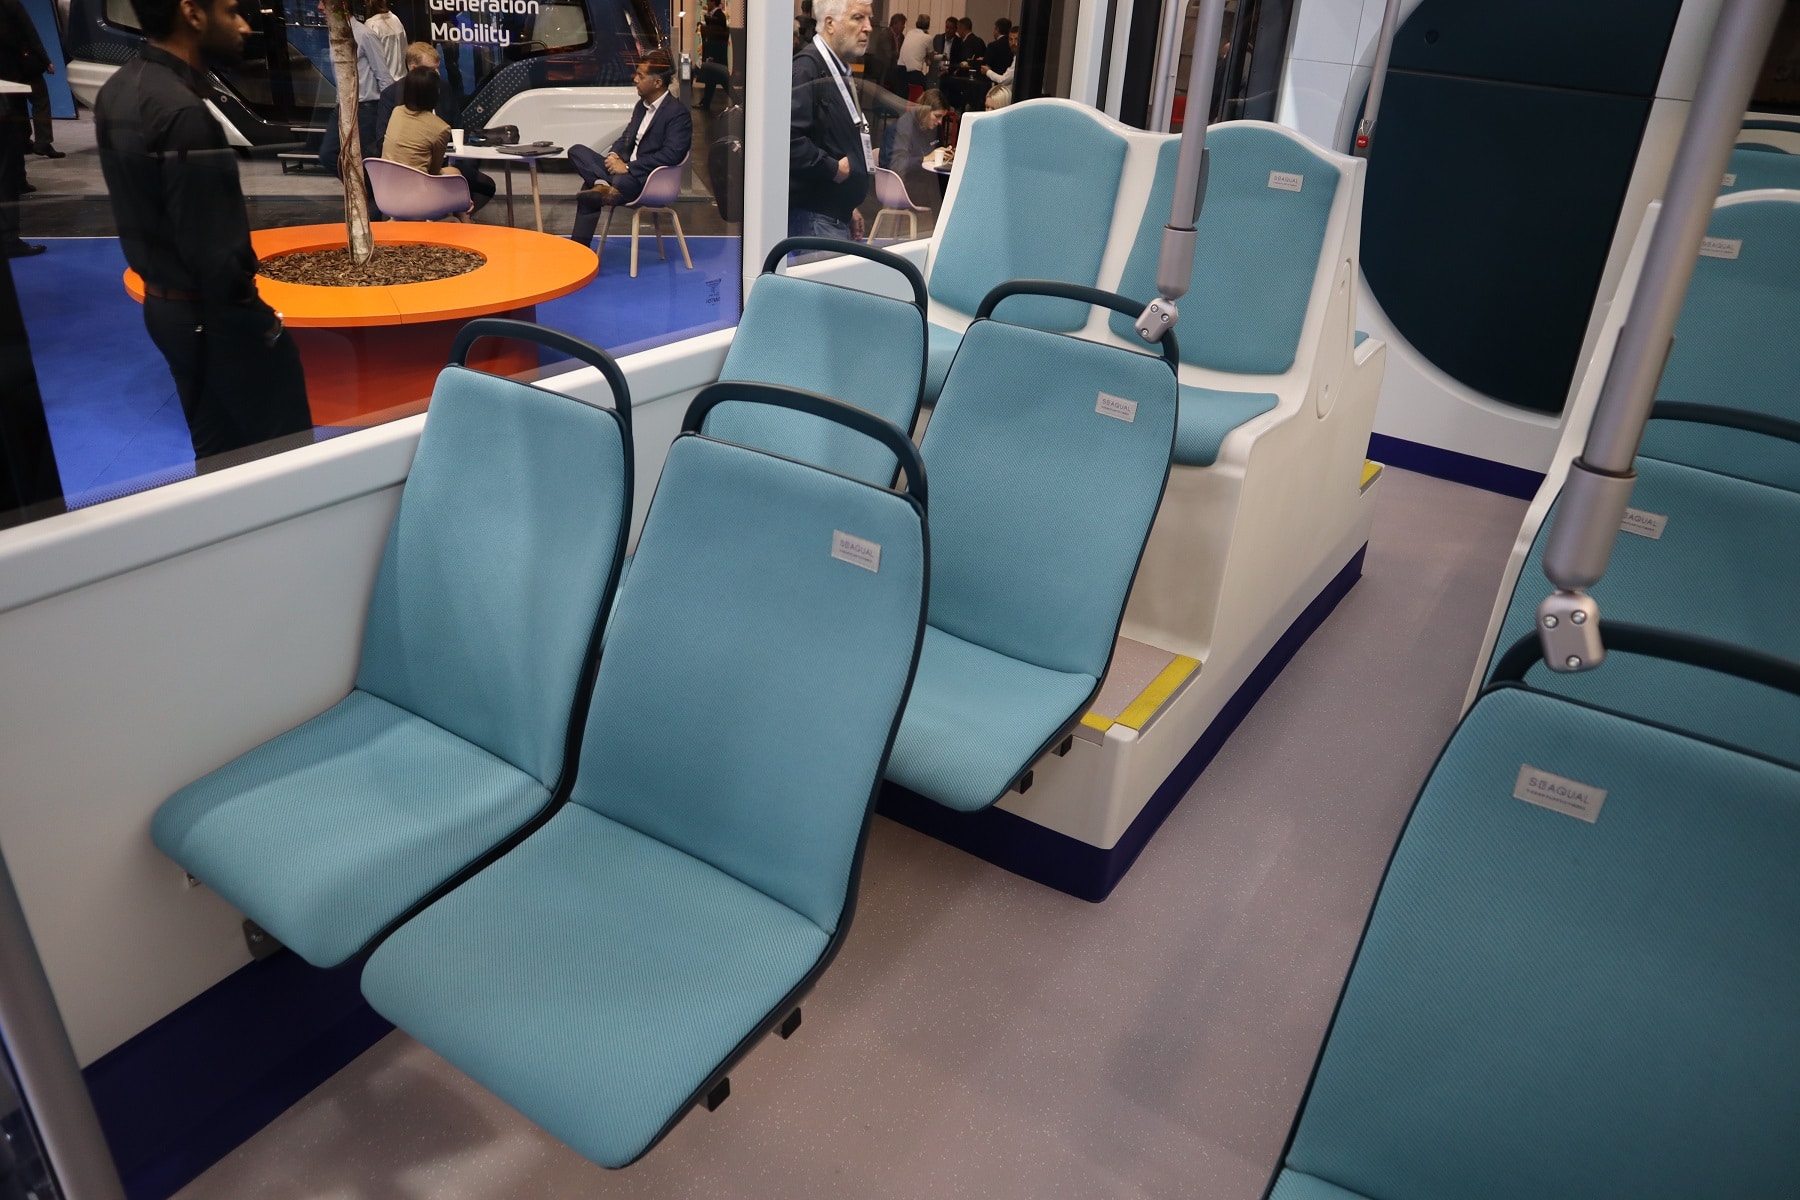 SeaQual recycled marine plastic fabric on seats